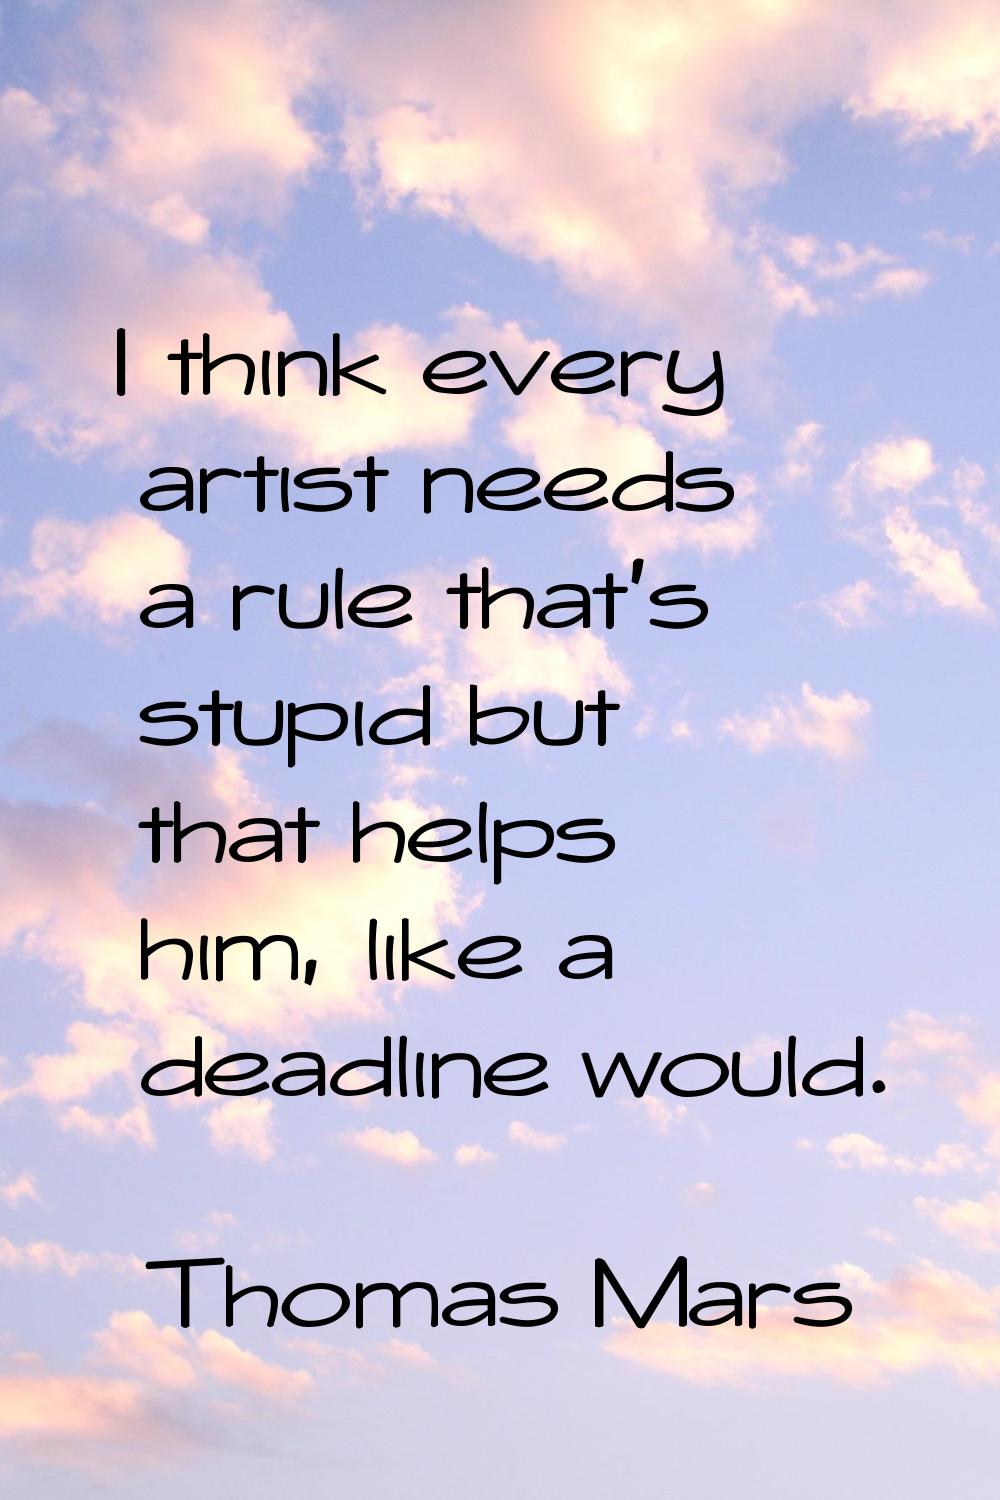 I think every artist needs a rule that's stupid but that helps him, like a deadline would.